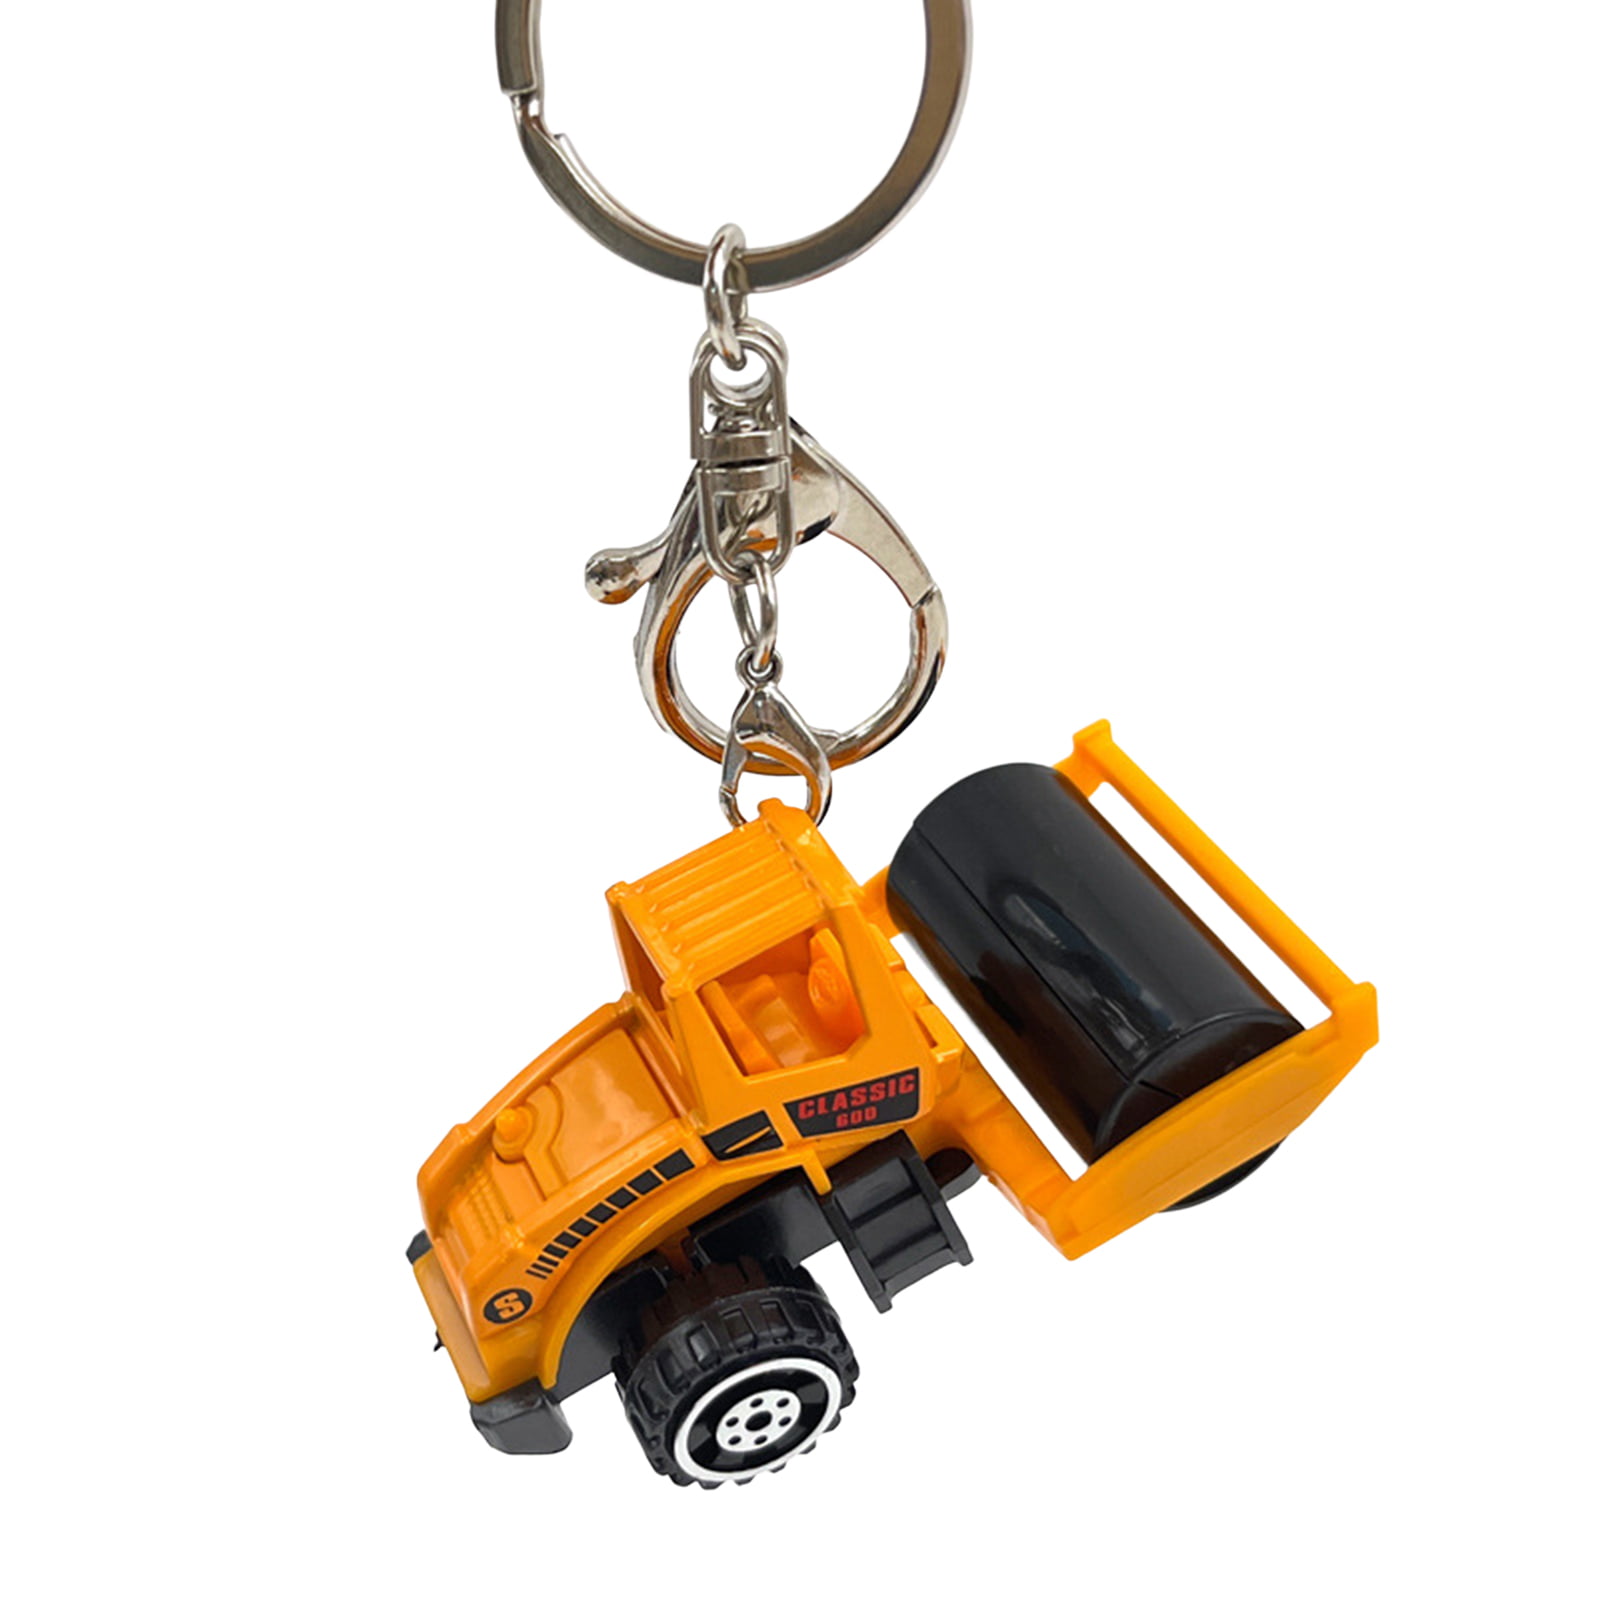  Red Truck Trucker Trucking Tractor Trailer Driver Unique Gift  Idea For Him Her Keychain Ring Holder Kit Key Car Tag Keyring Key Chain  Charm Accessories Gift